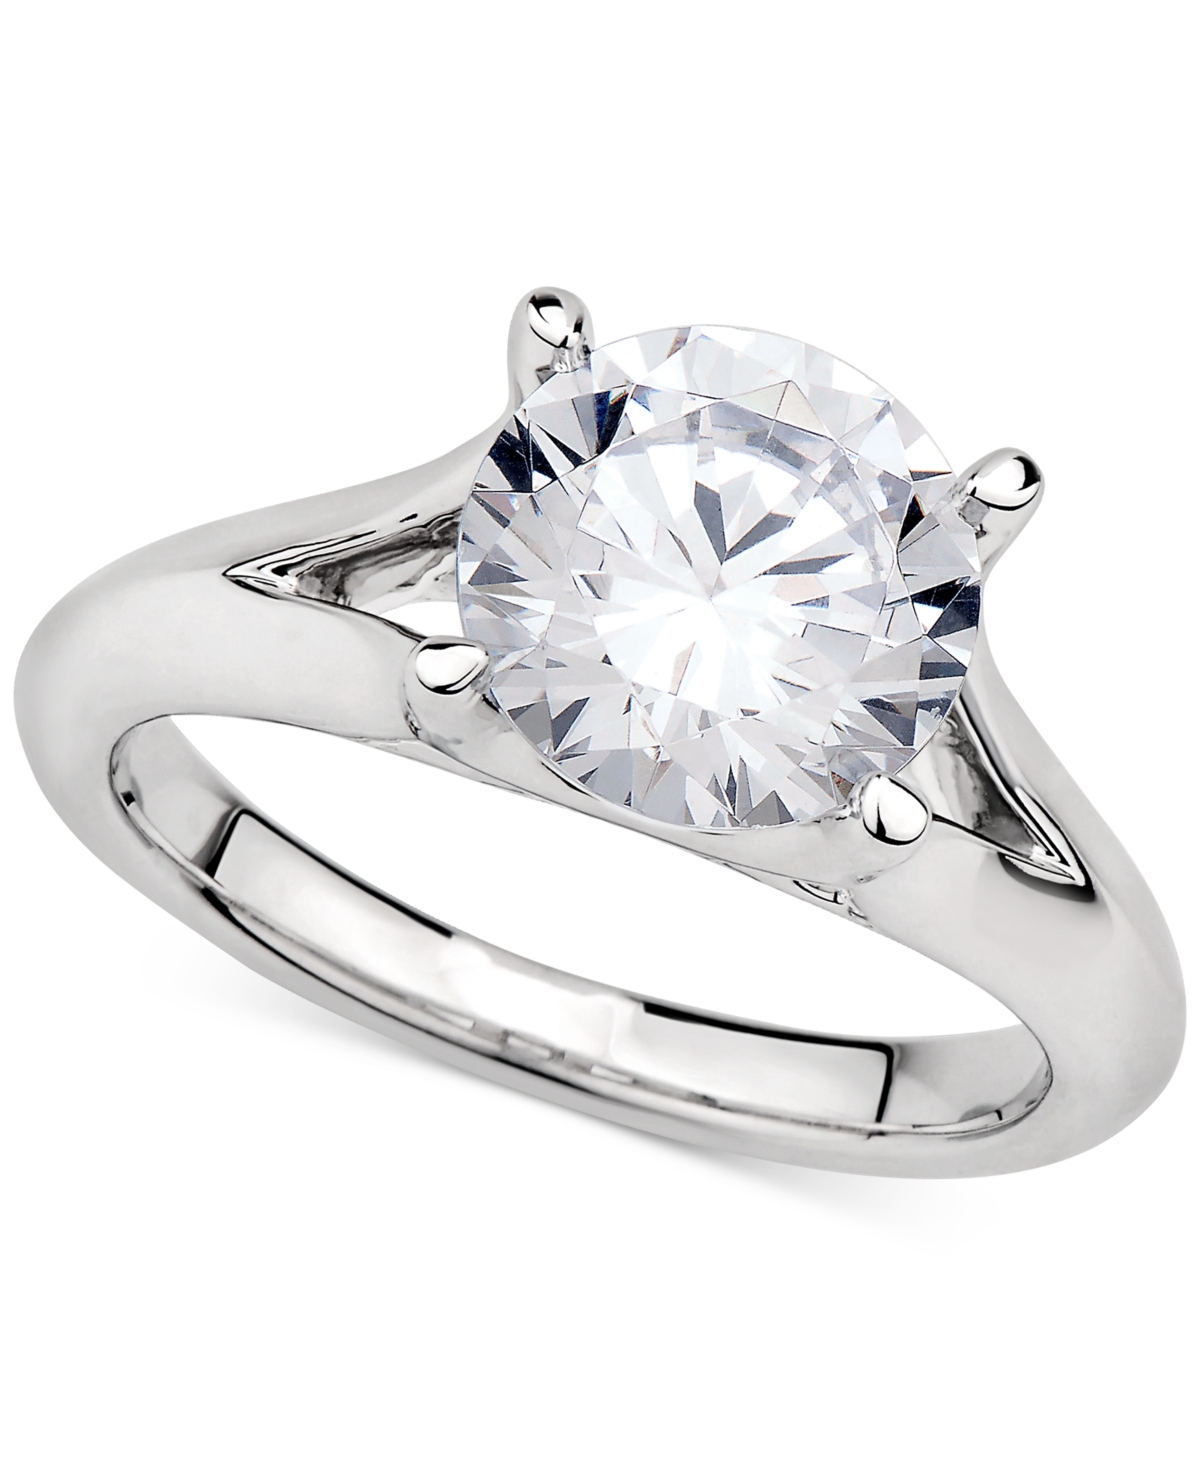 Gia Certified Diamonds Gia Certified Diamond Solitaire Ring (3 ct. t.w.) in 14k White Gold